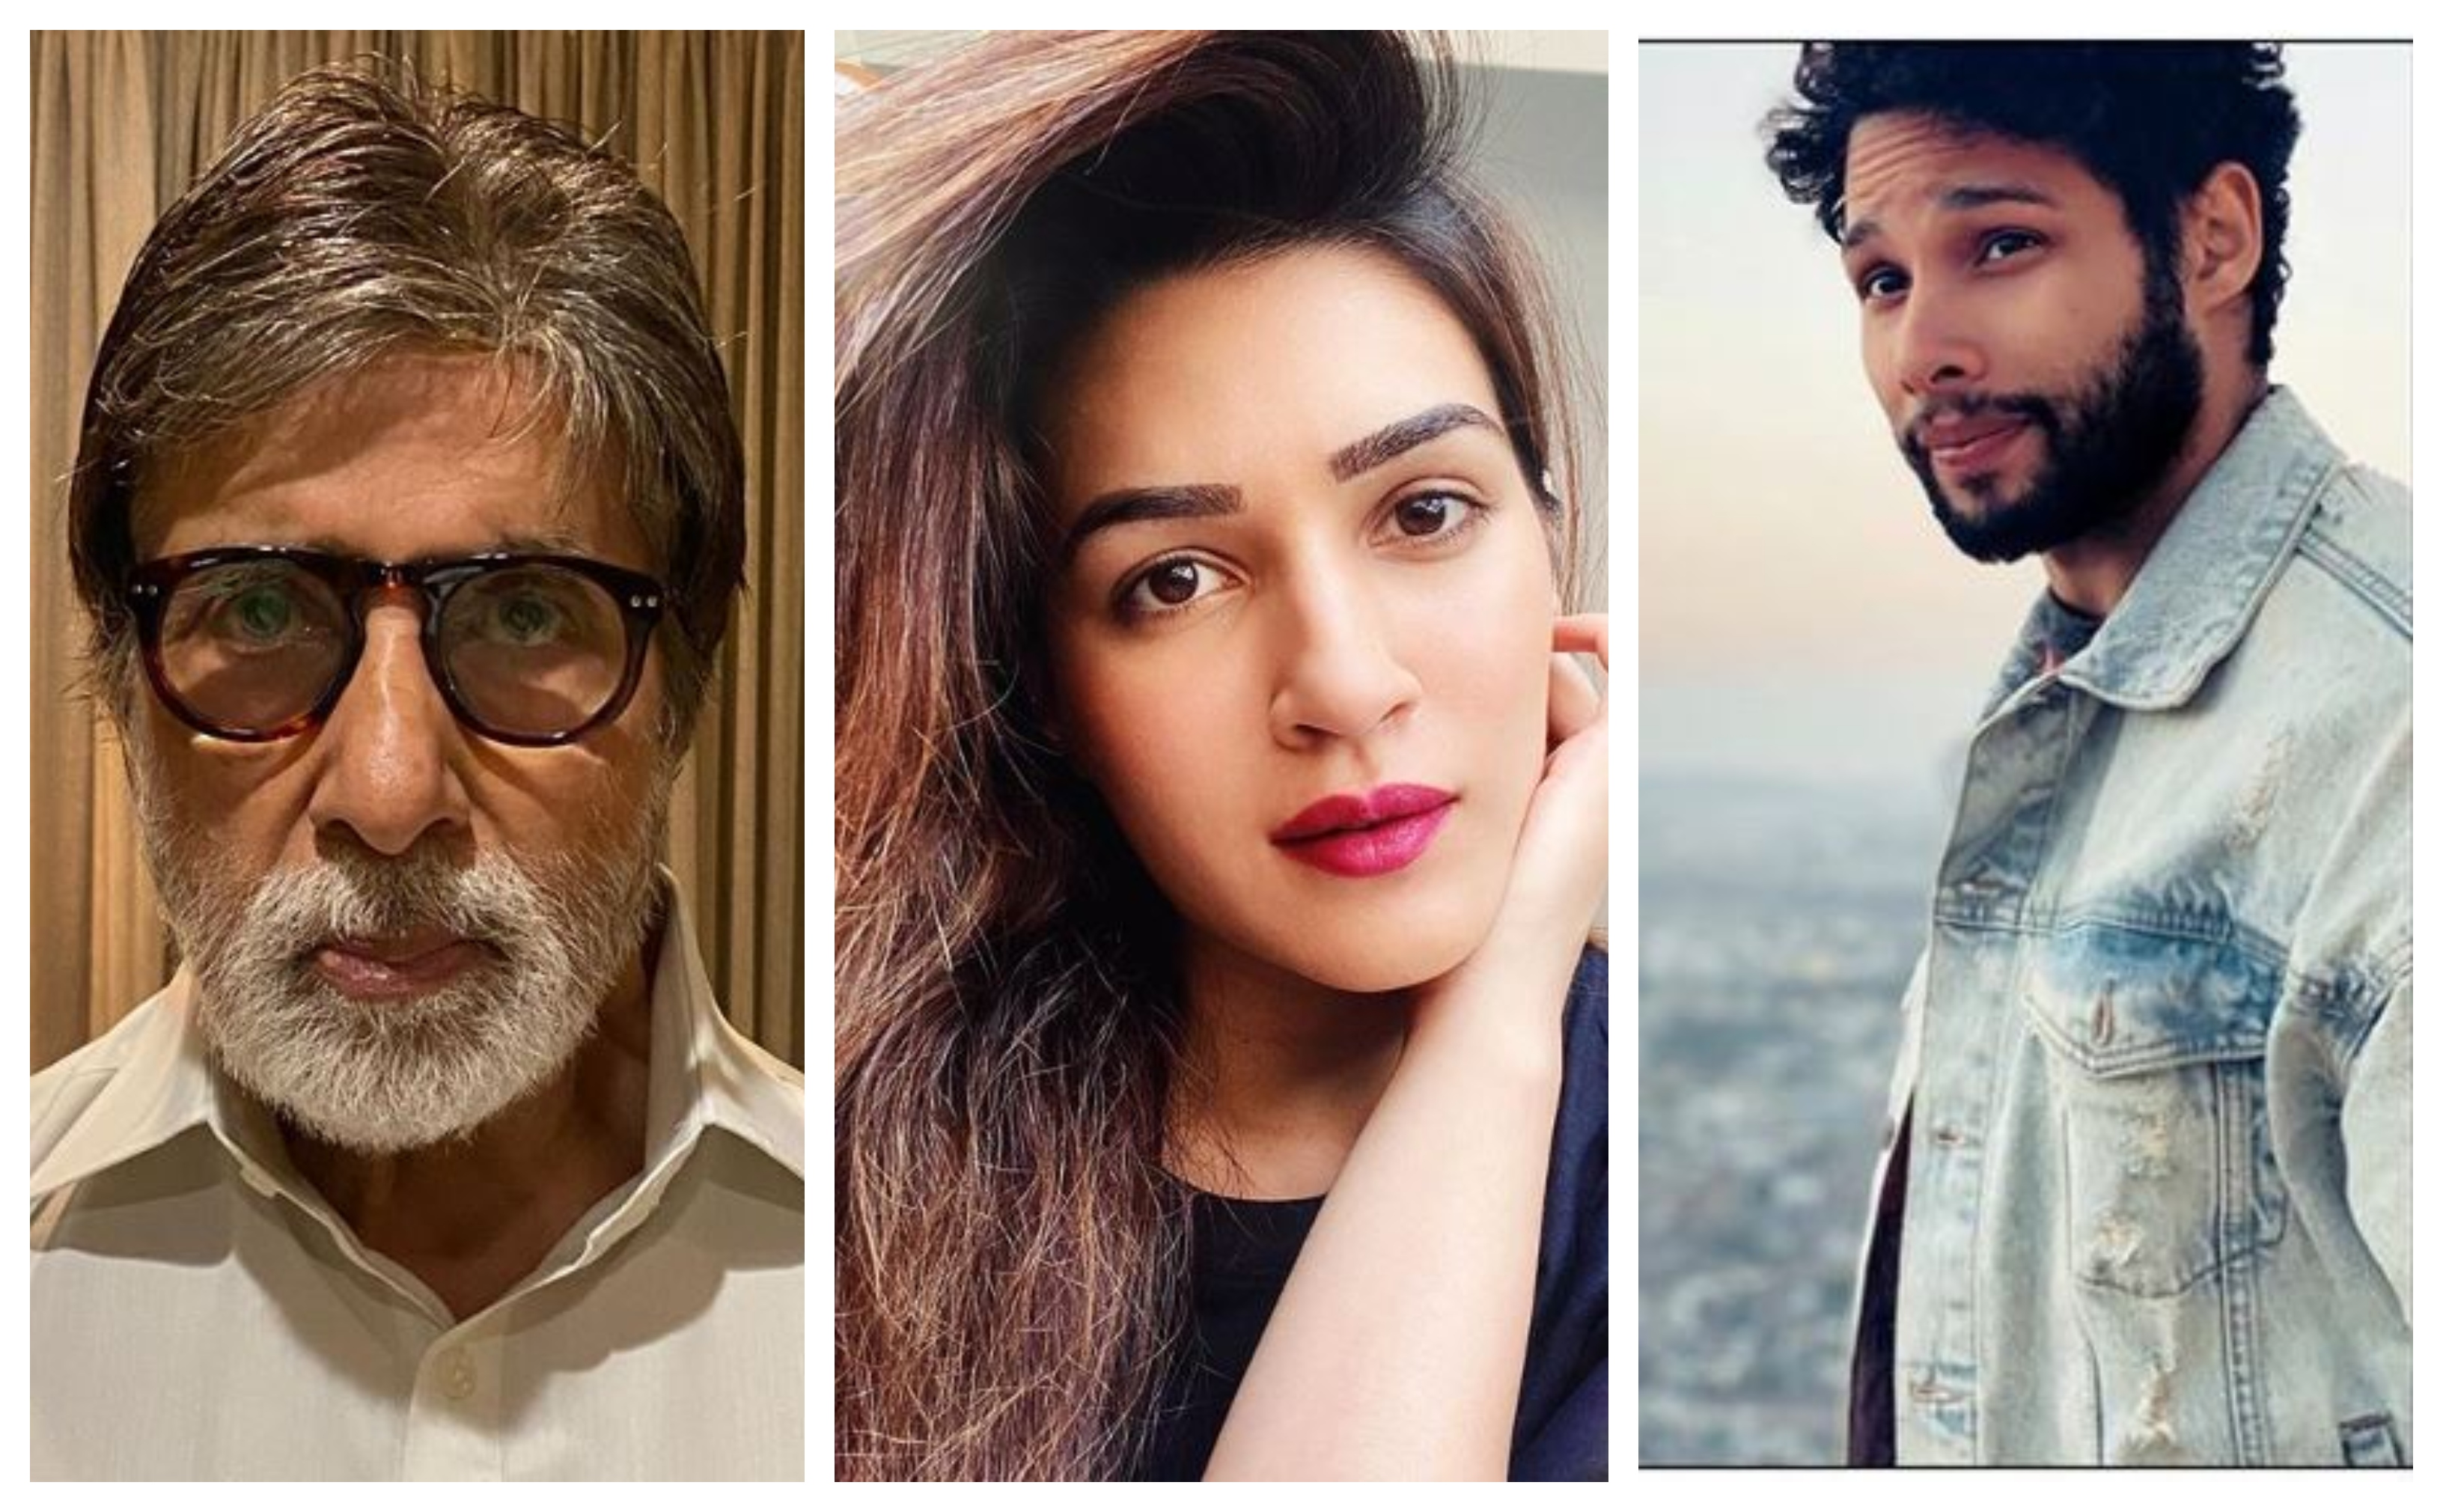 From Amitabh Bachchan to Kriti Sanon, here’s how B-town celebs delved into word play amid lockdown